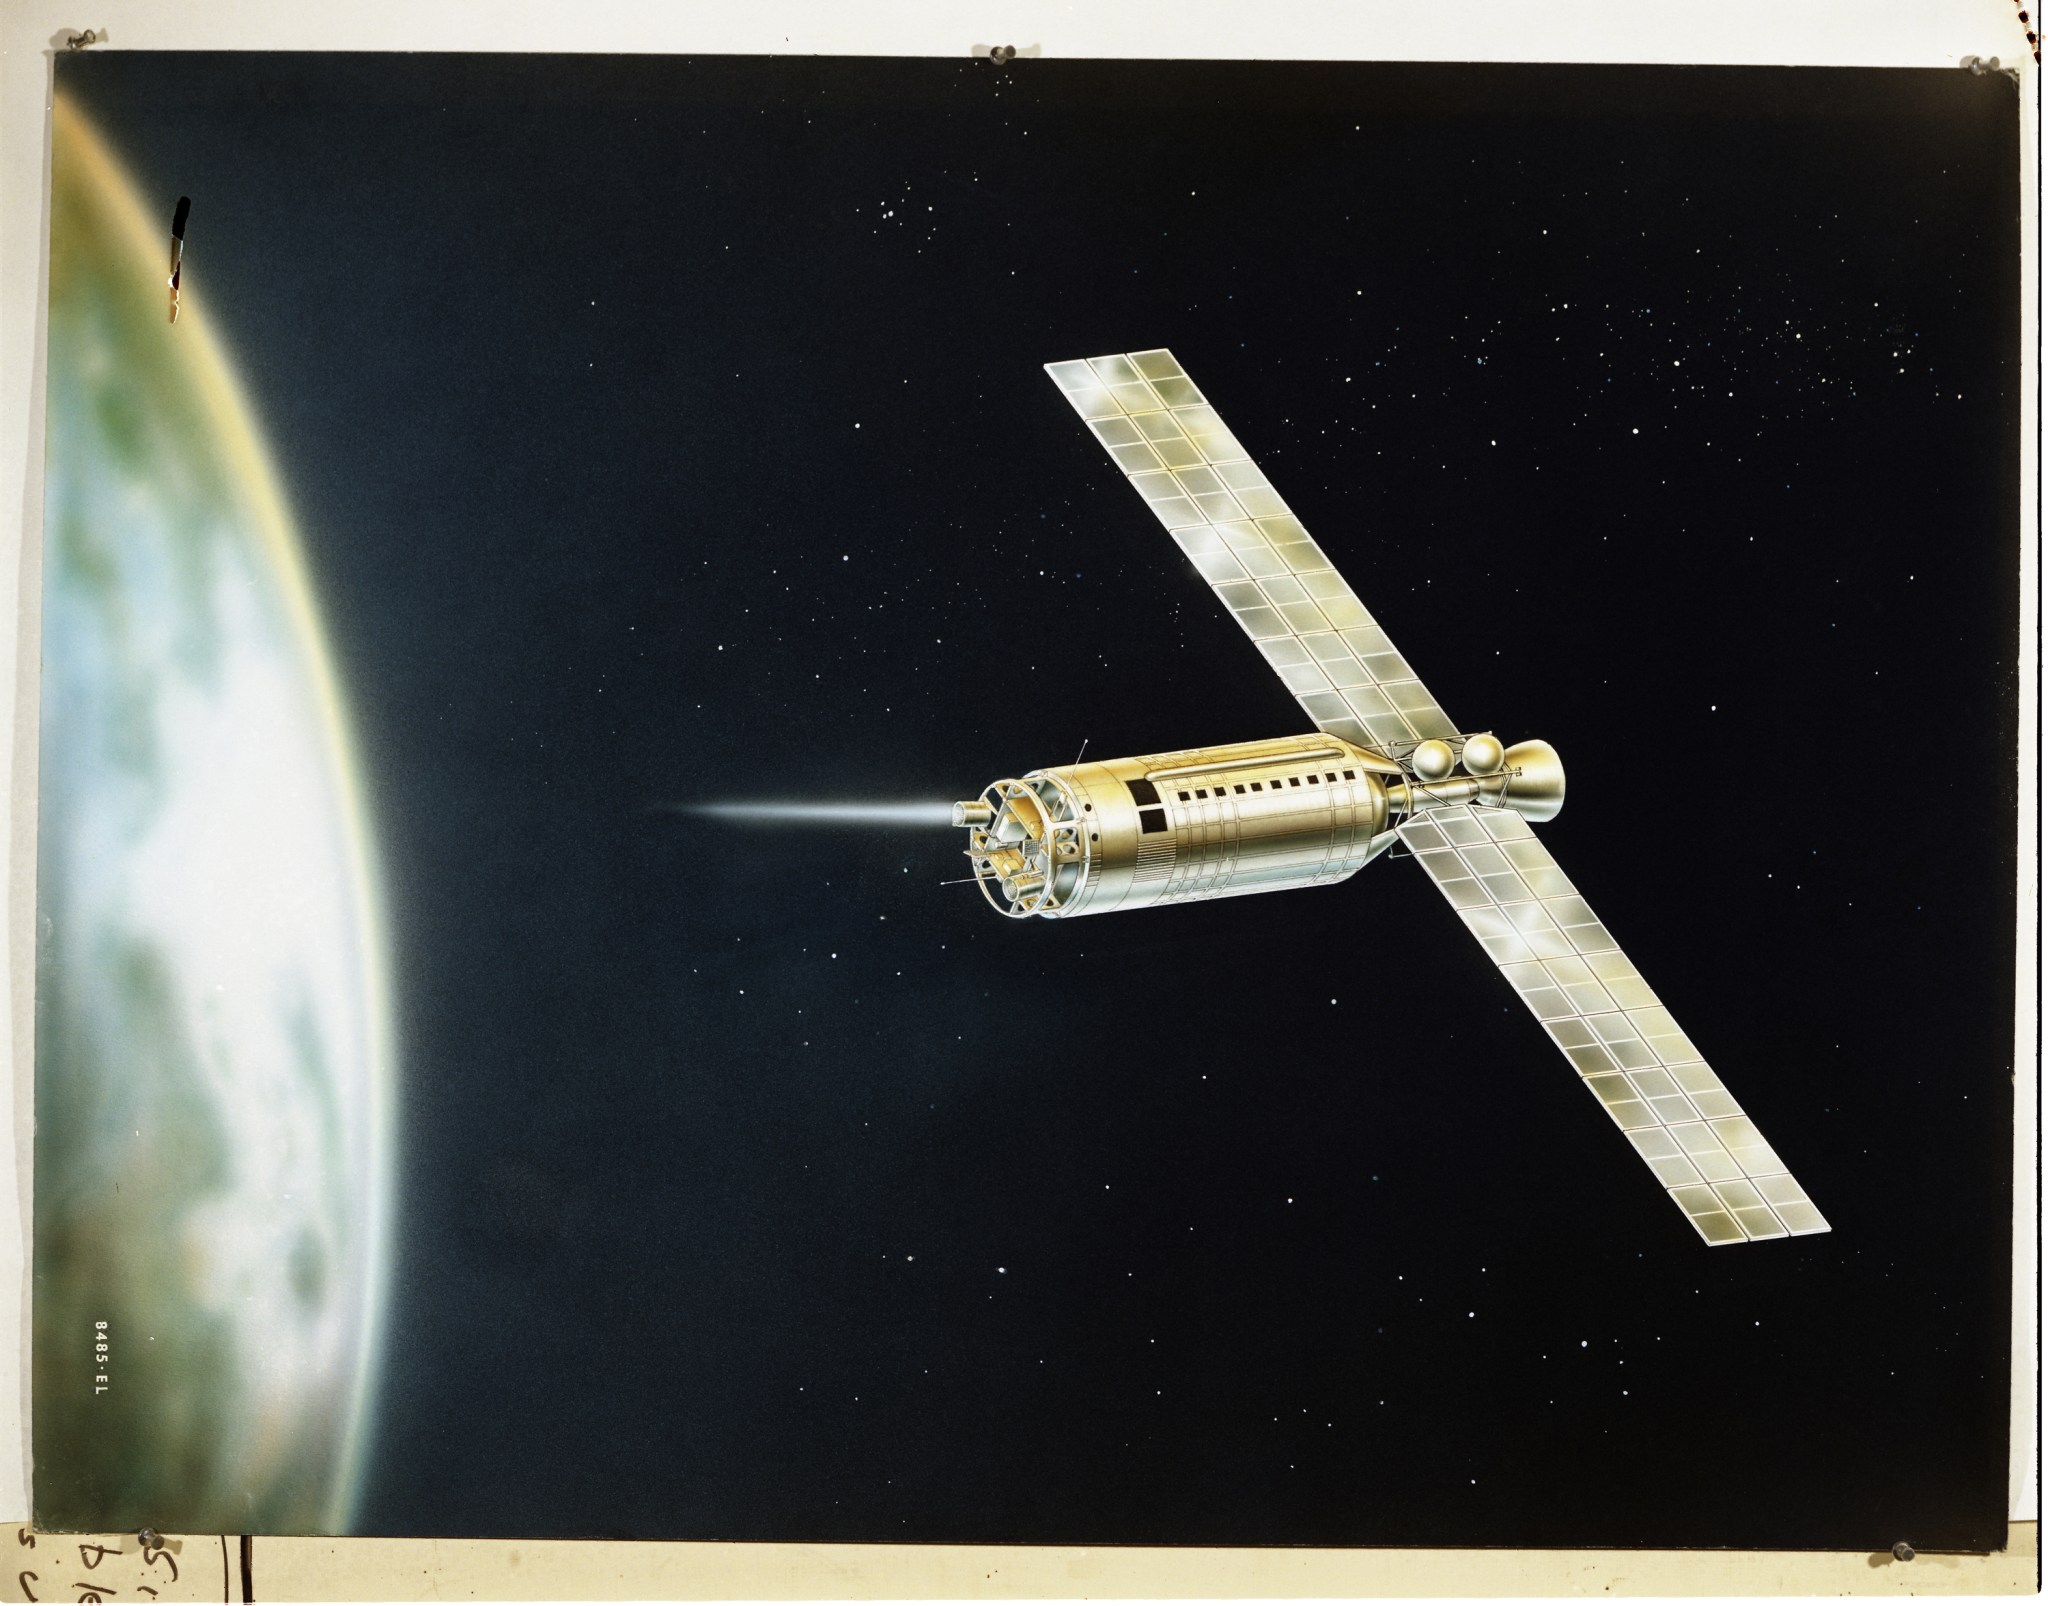 An illustration of a gold spacecraft flying through space with thrusters releasing propellant and solar arrays. The Earth can be seen to the left of the illustration.